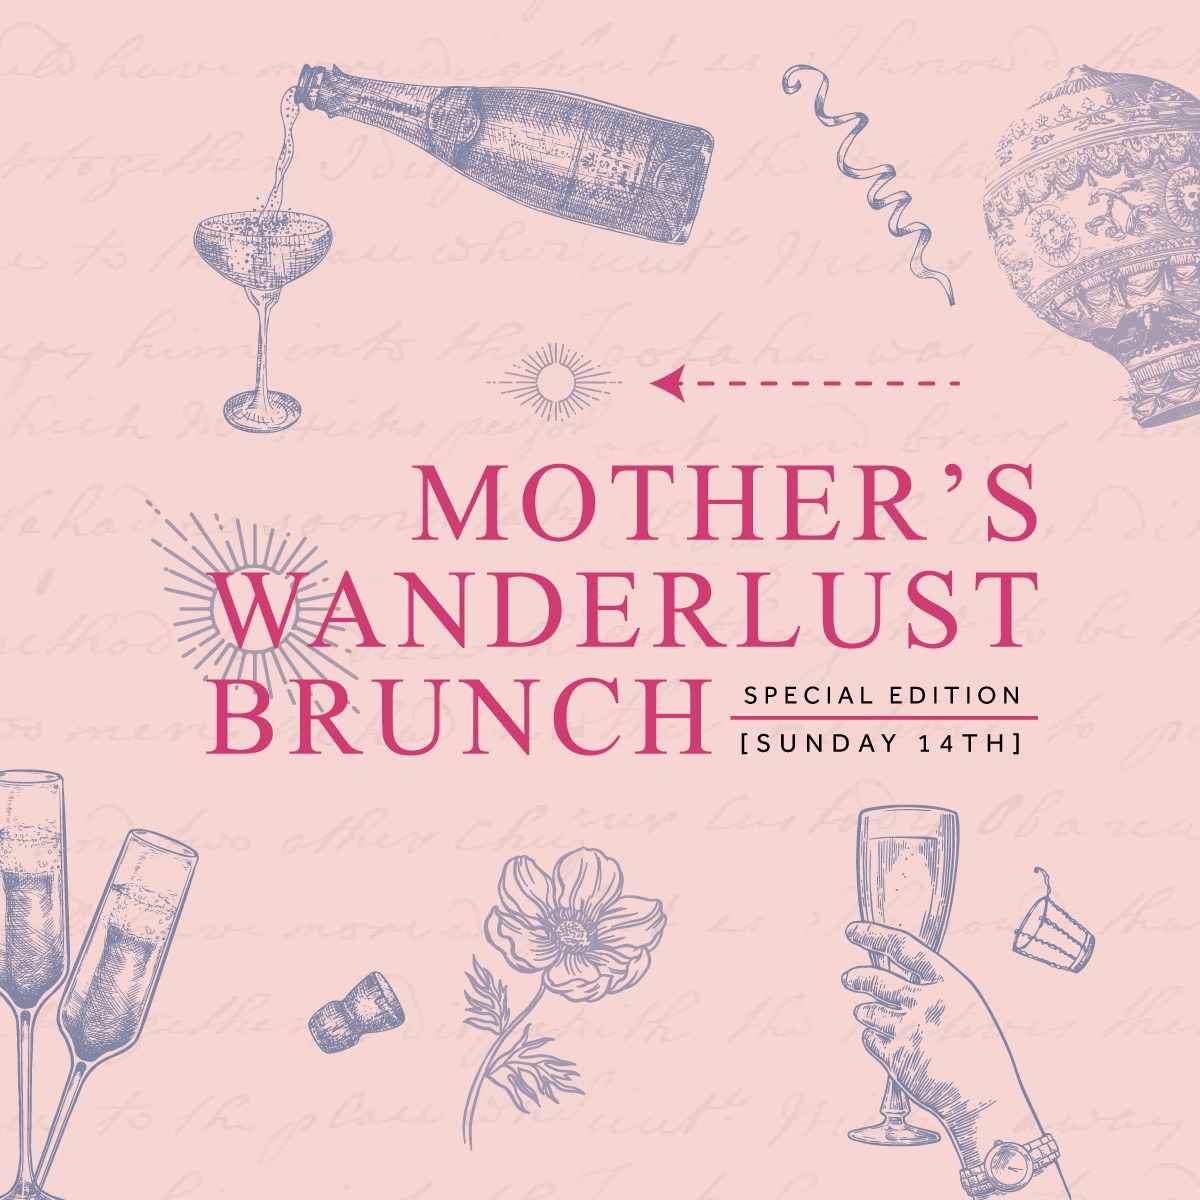 Mother's Day Wanderlust Brunch by The Marriott Explore Cayman